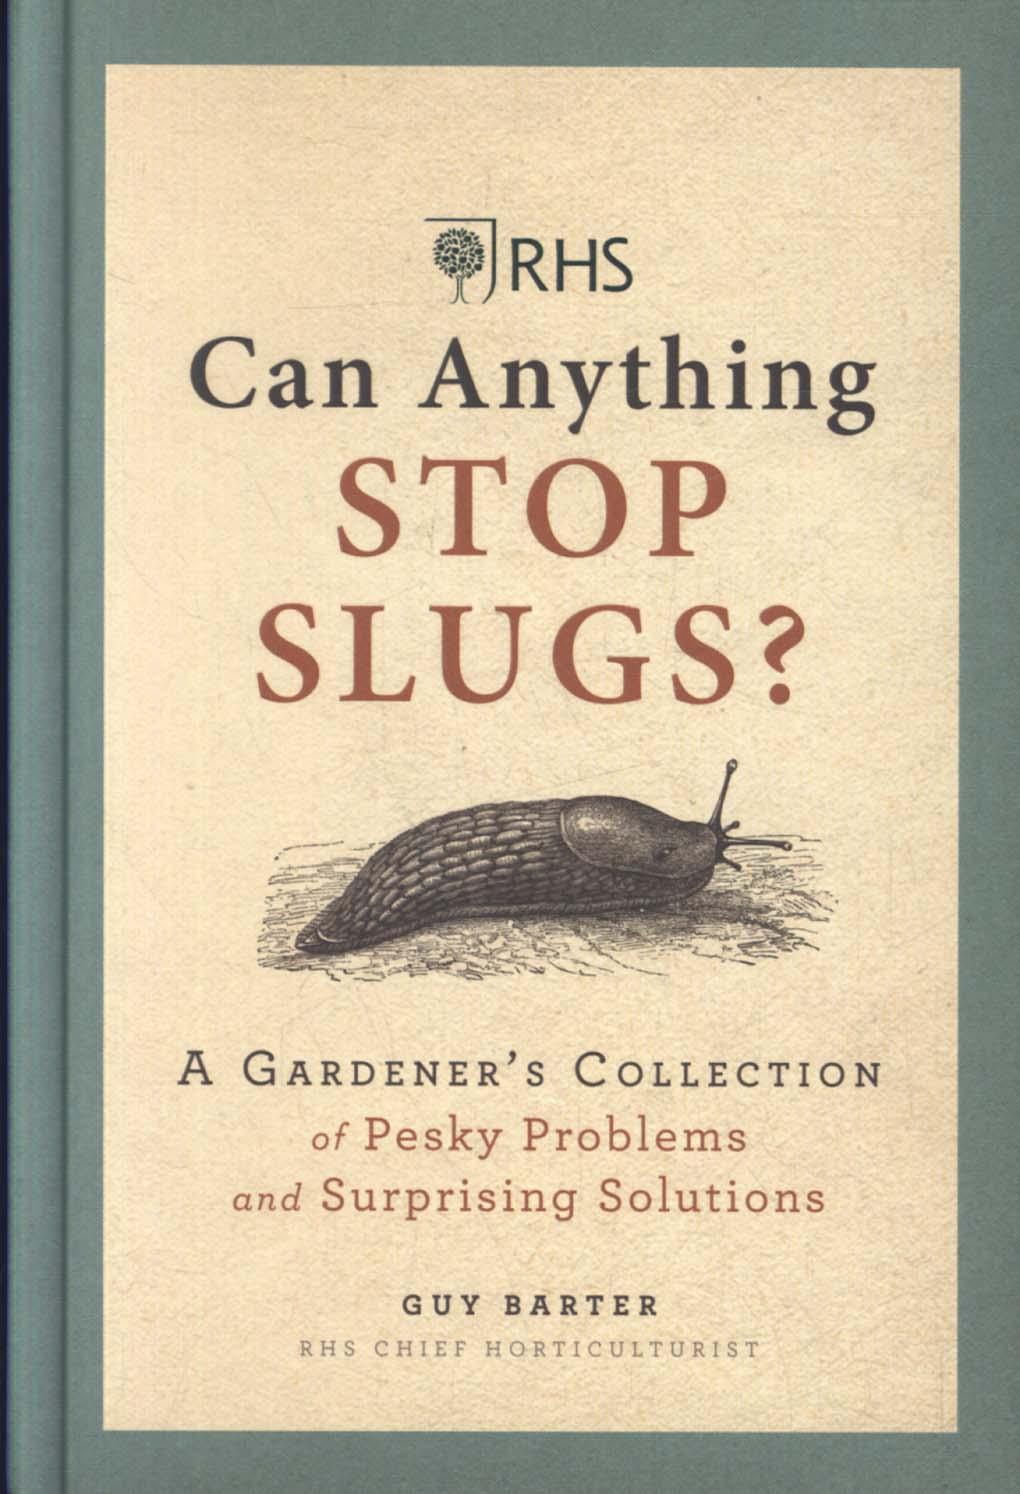 RHS Can Anything Stop Slugs?